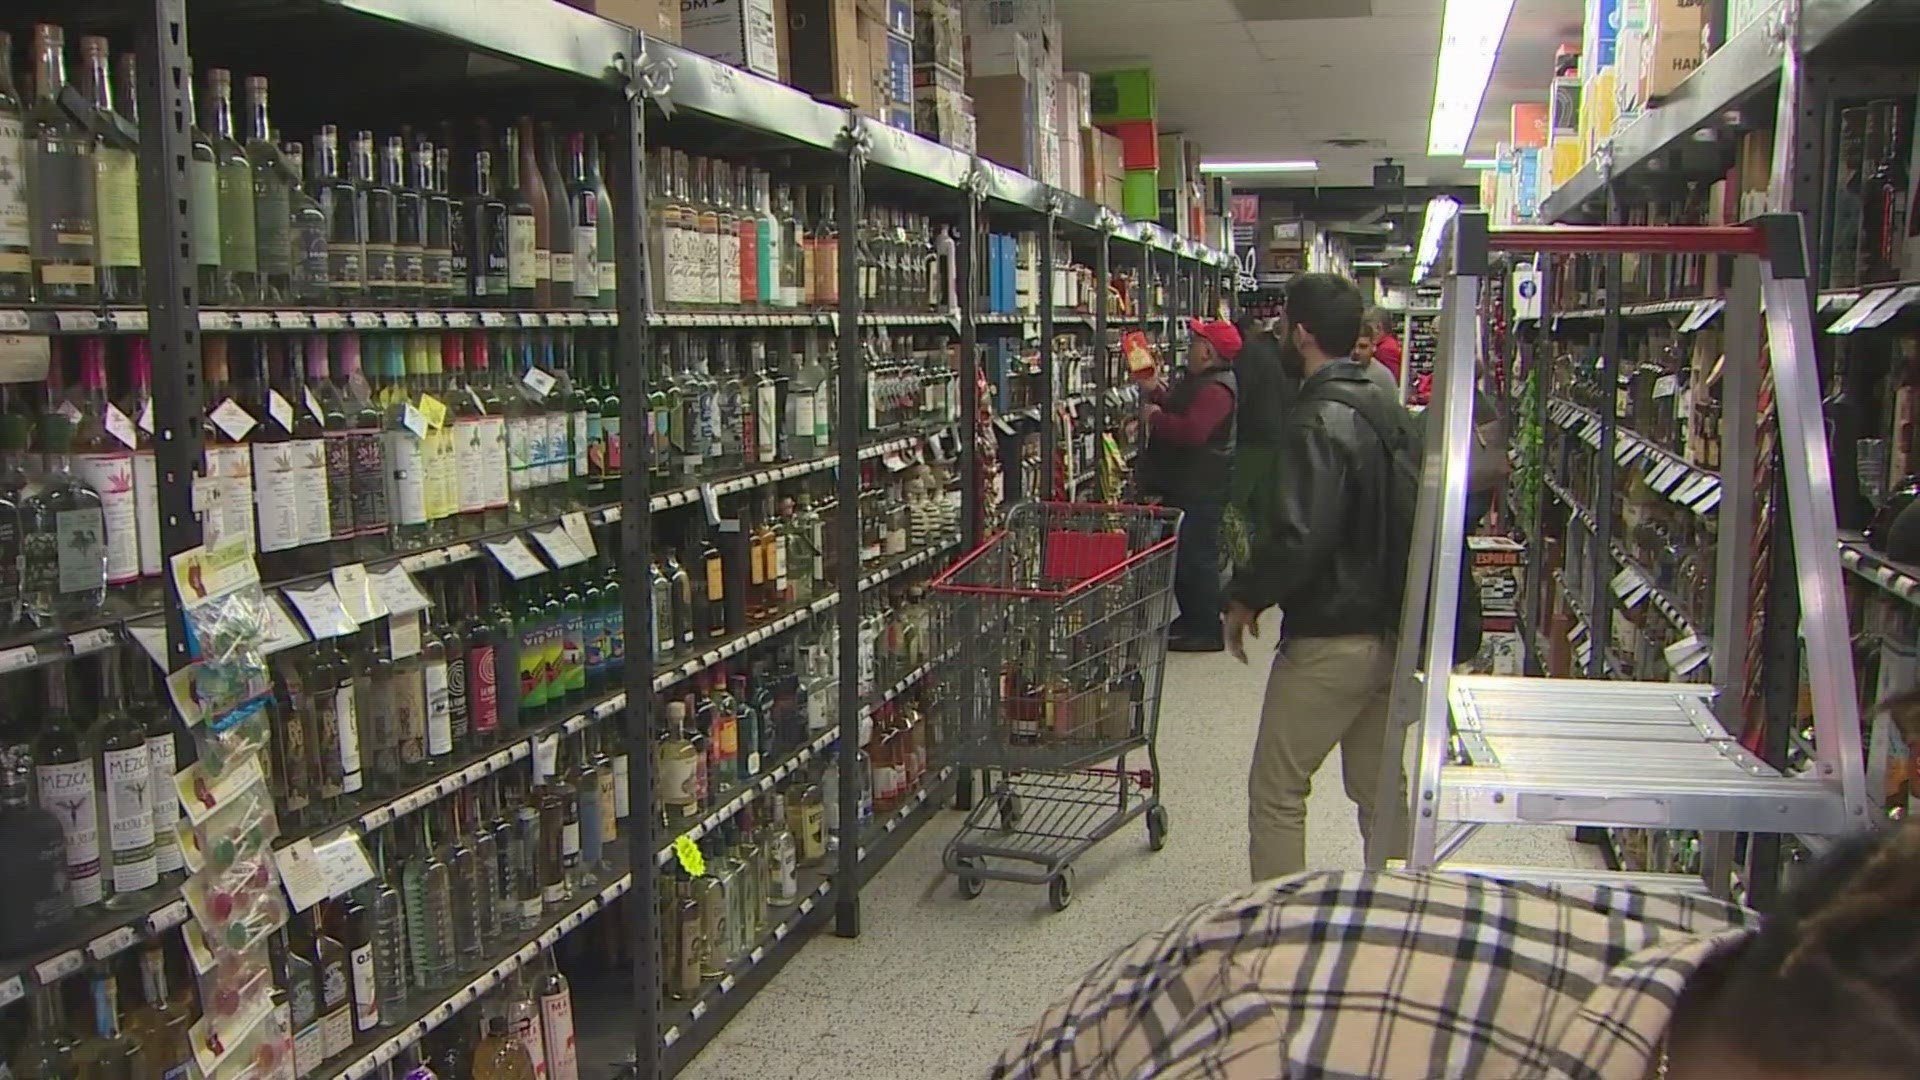 According to Texas law, liquor stores can't be open on New Year's Day. And New Year's Eve falls on a Sunday, so law prohibits liquor stores from opening.